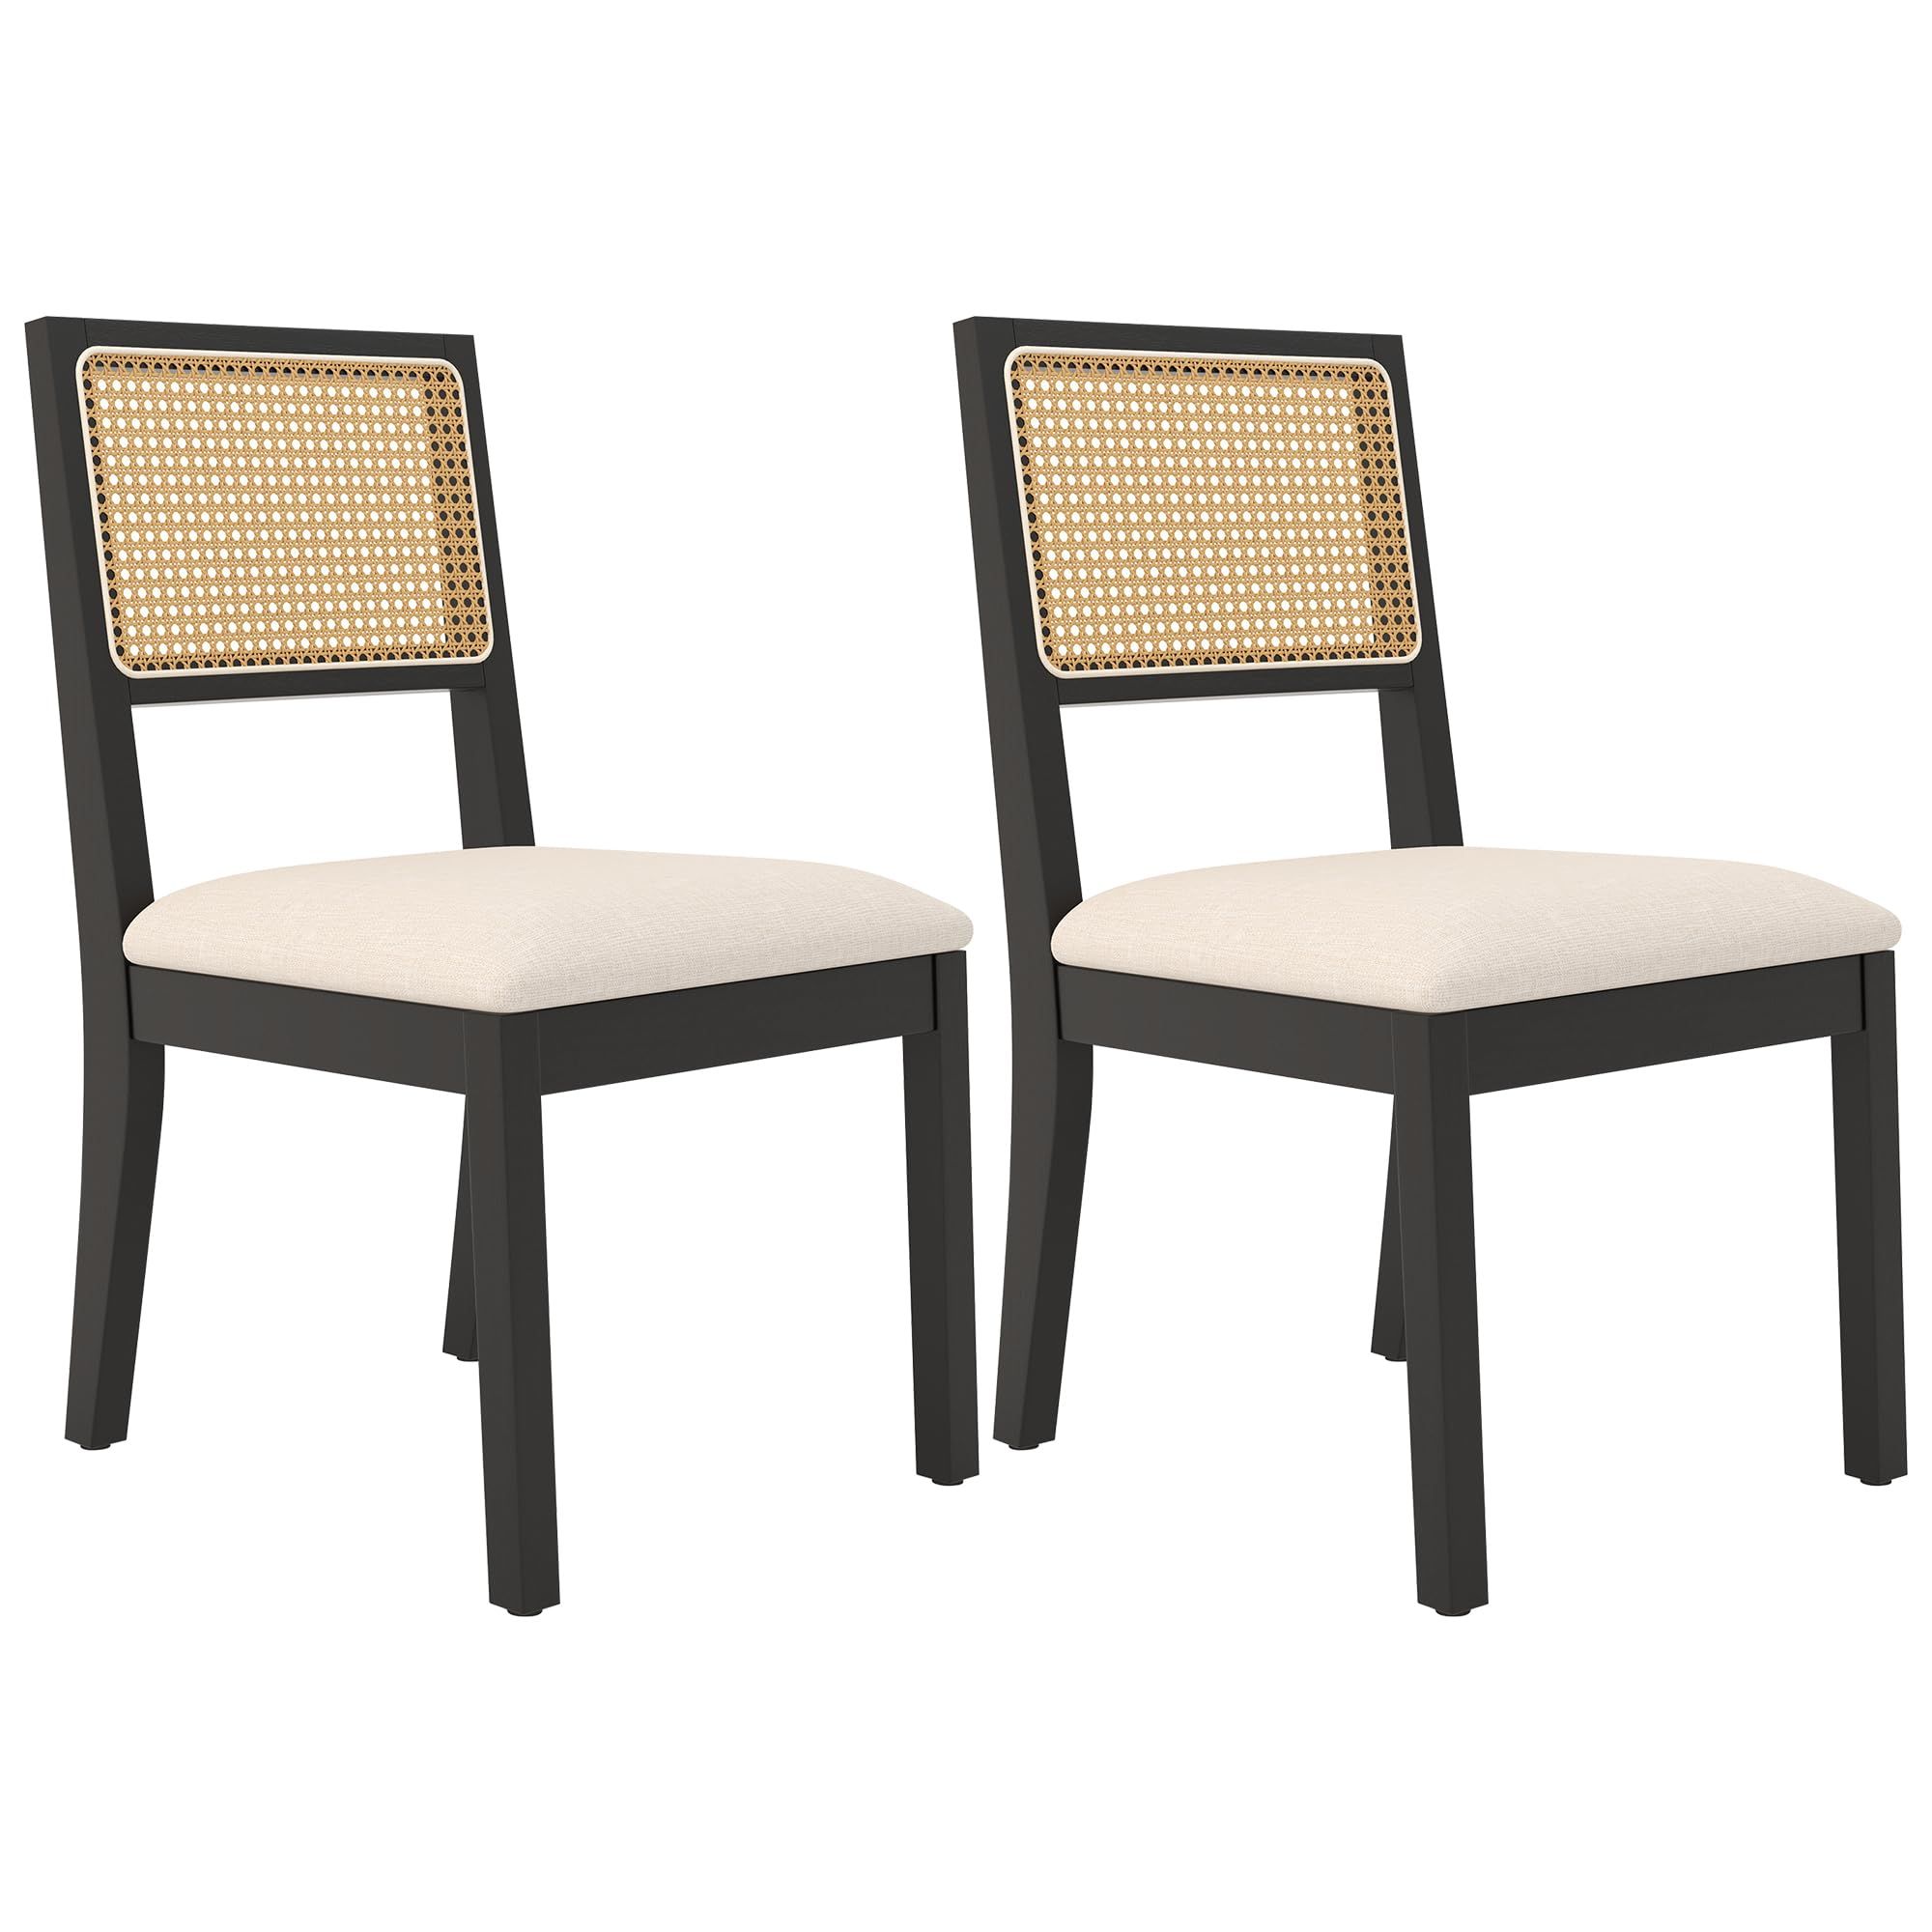 Westice rattan Dining chair | Amazon (US)